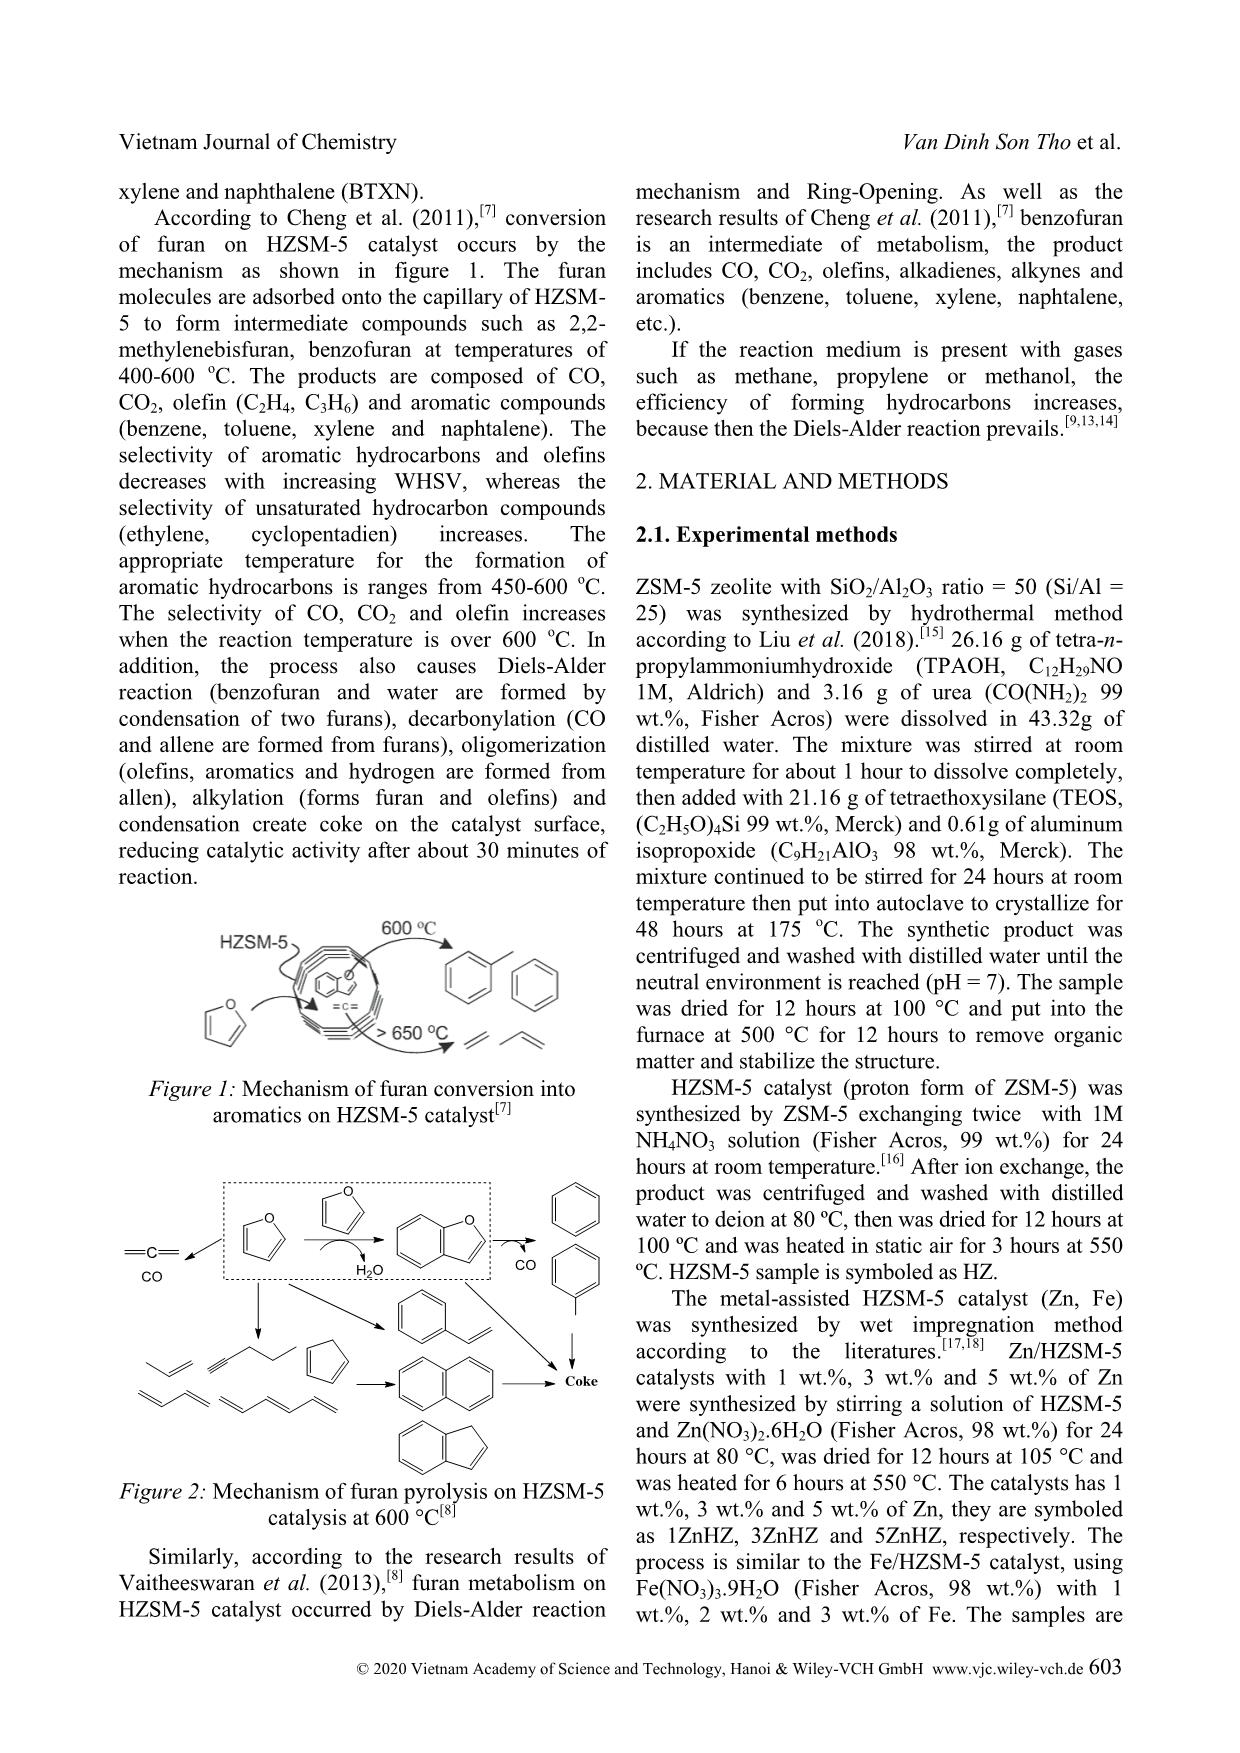 Study on furfural conversion into aromatics over Zn/HZSM-5 and Fe/HZSM-5 catalysts trang 2